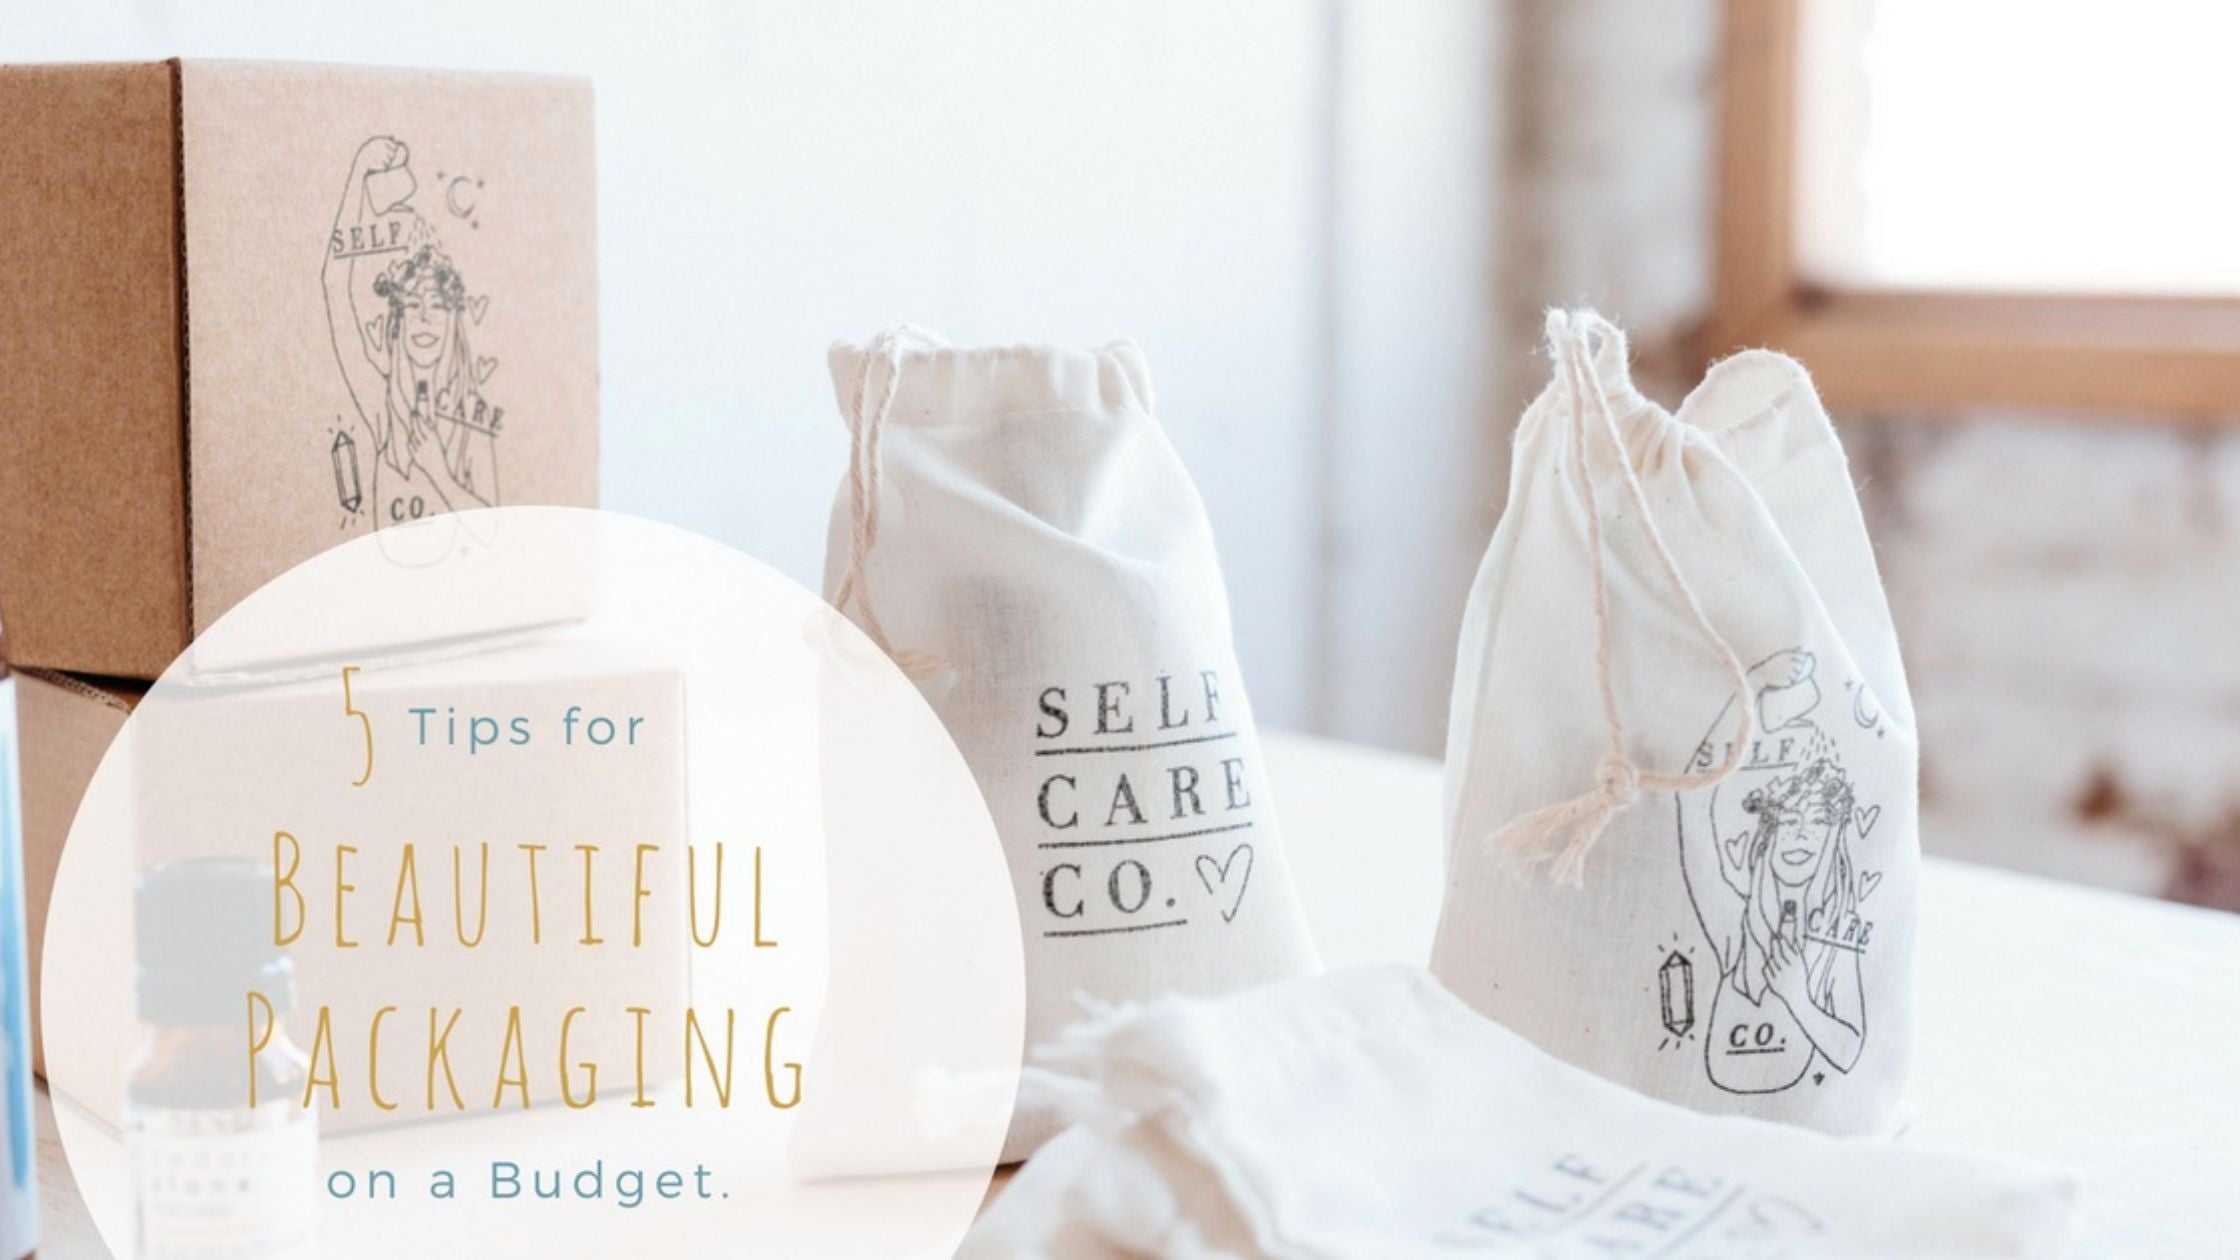 5 Tips for Beautiful Packaging on a Budget